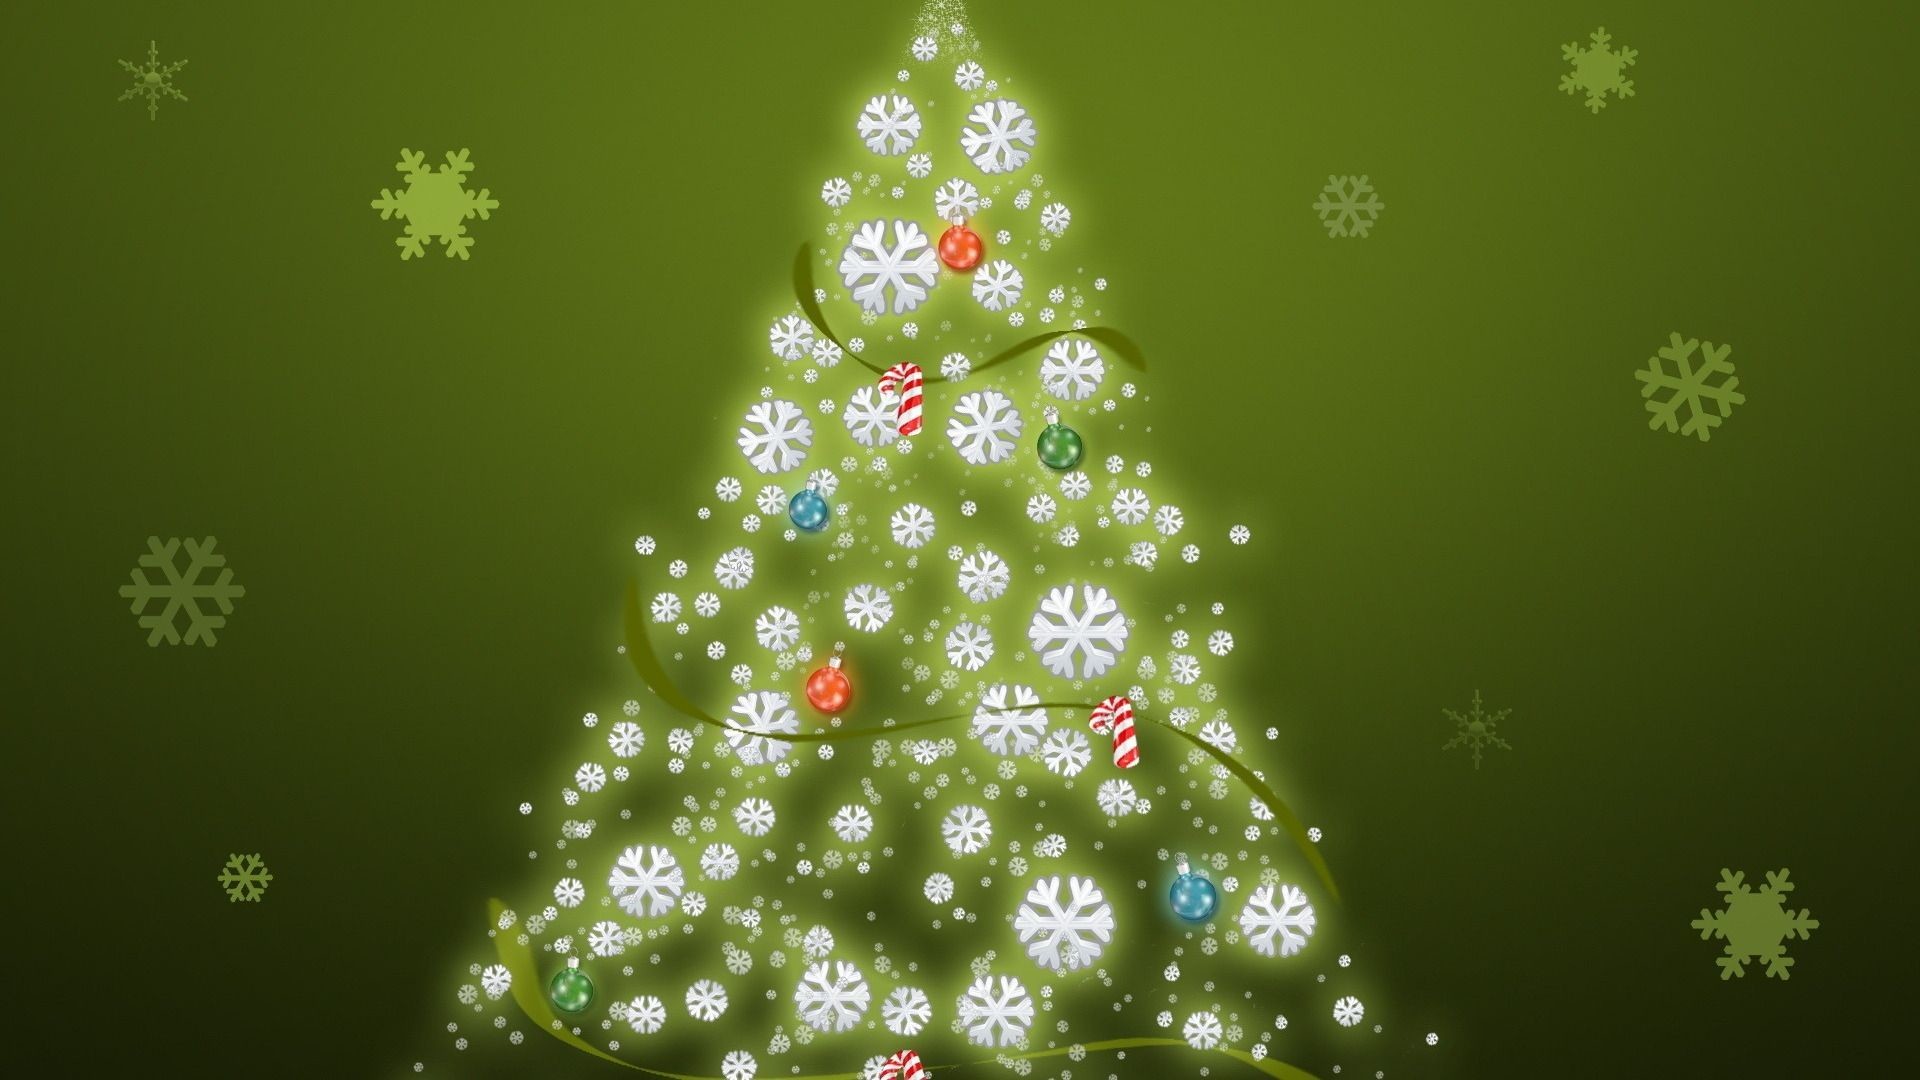 1920x1080 Merry Christmas Green Abstract Desktop Background Photo